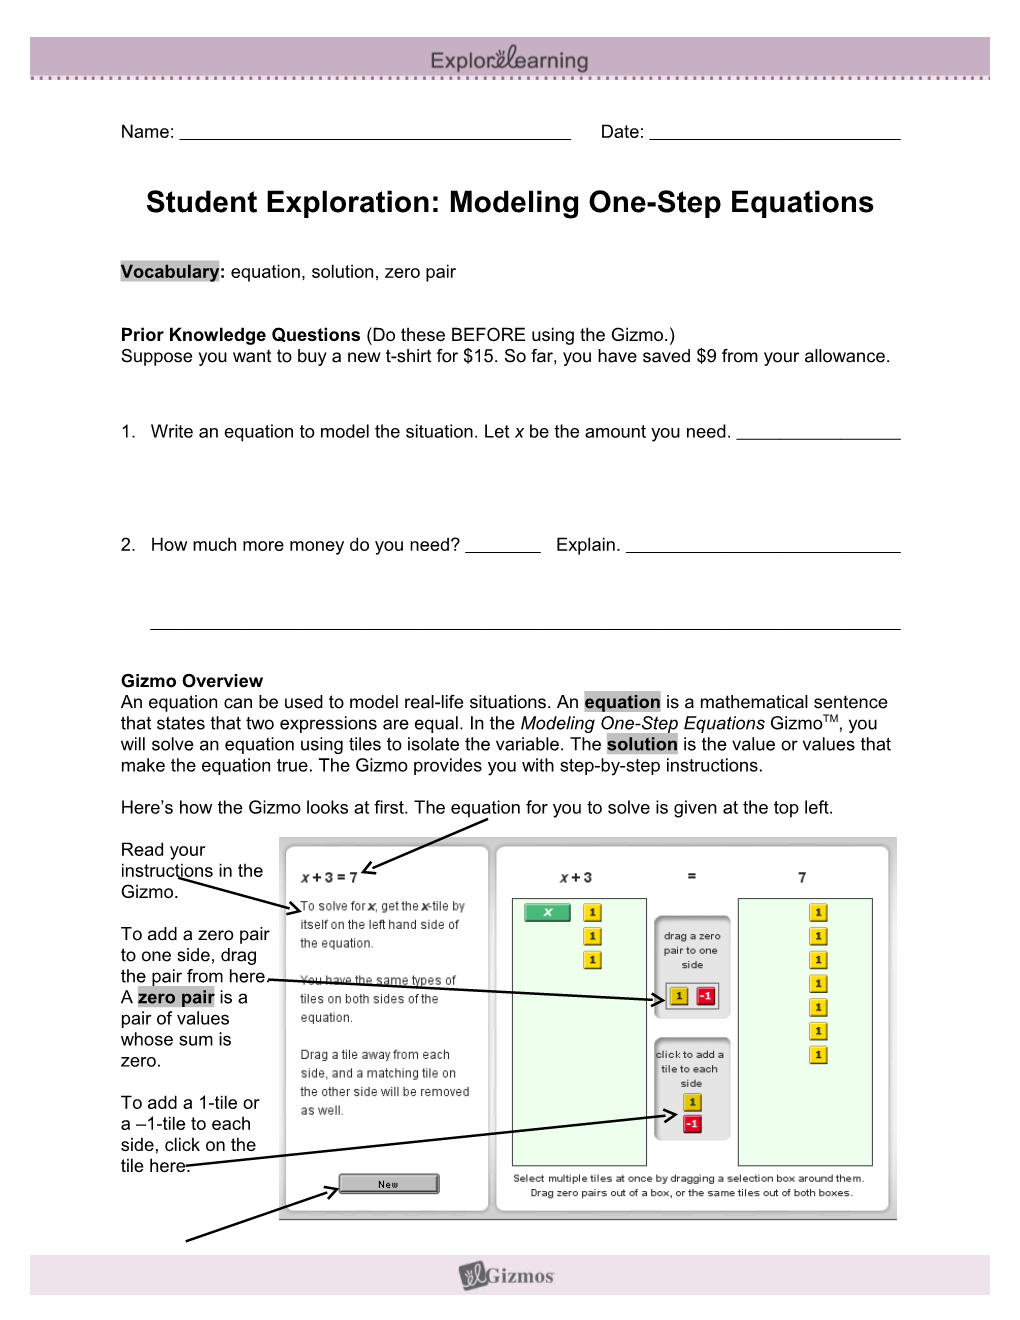 Modeling One-Step Equations